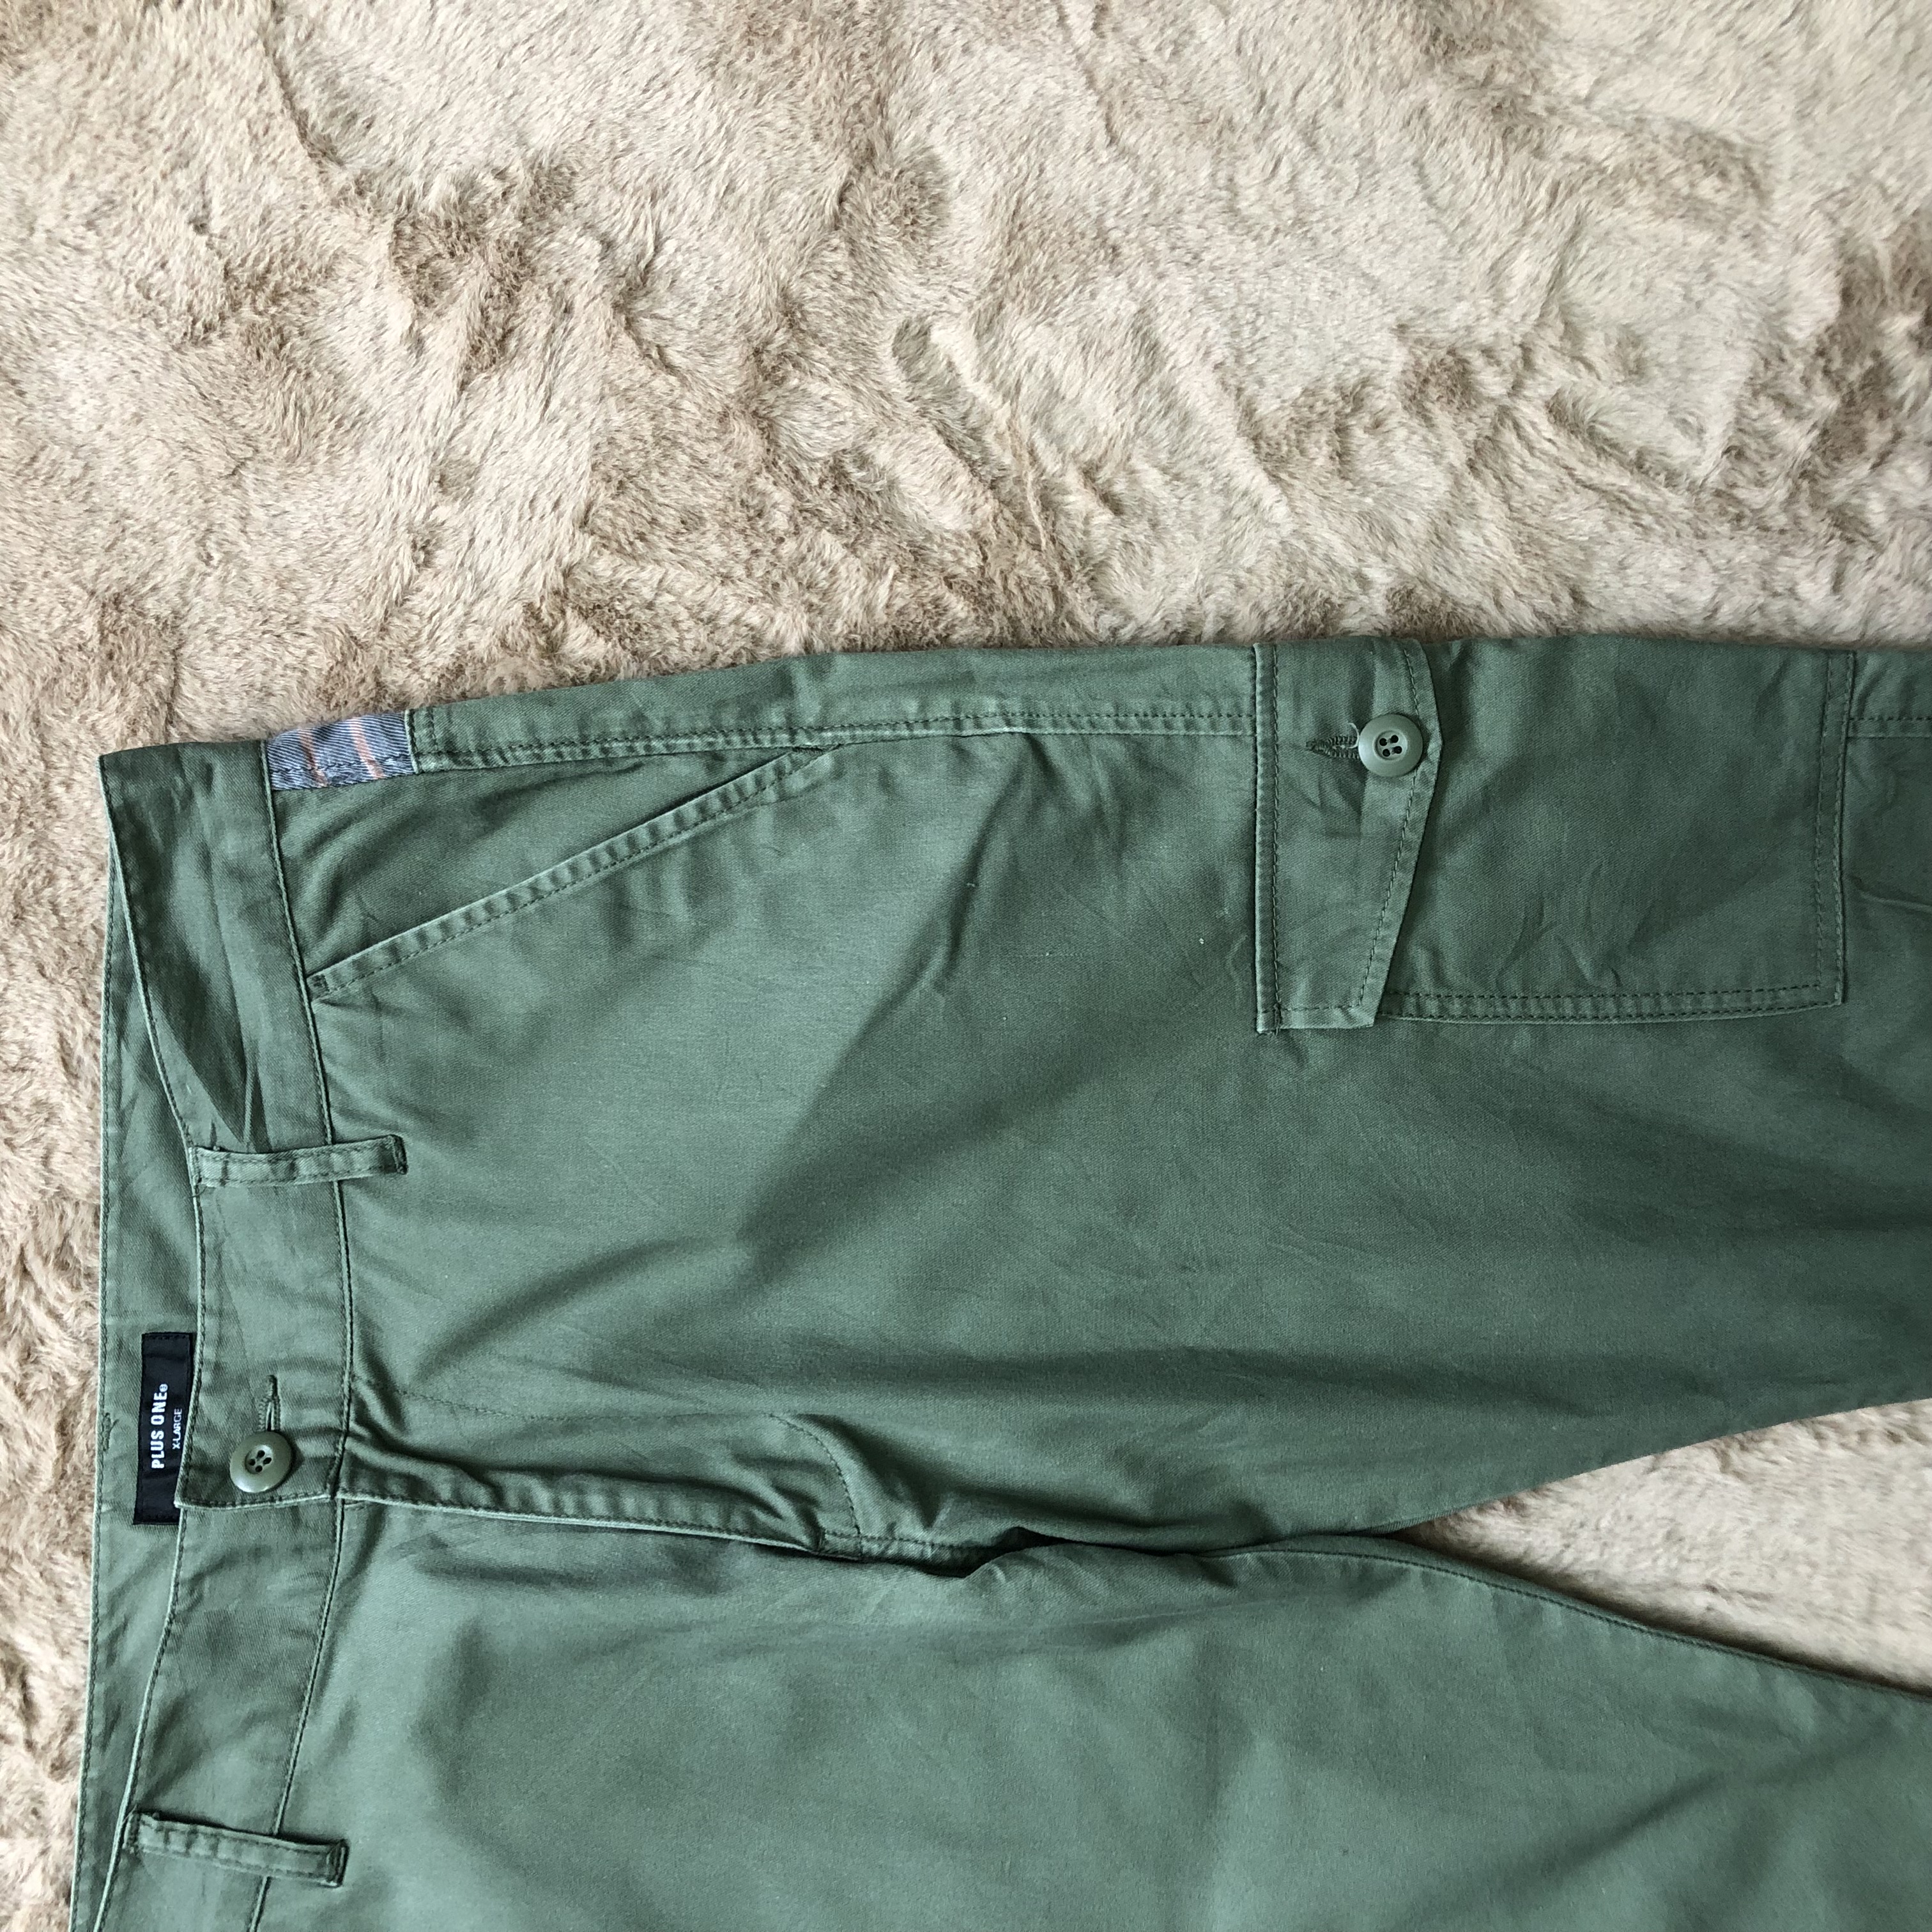 Japanese Brand - Plus One Military Army Style Cargo Pants 6 Pocket #4289-149 - 4